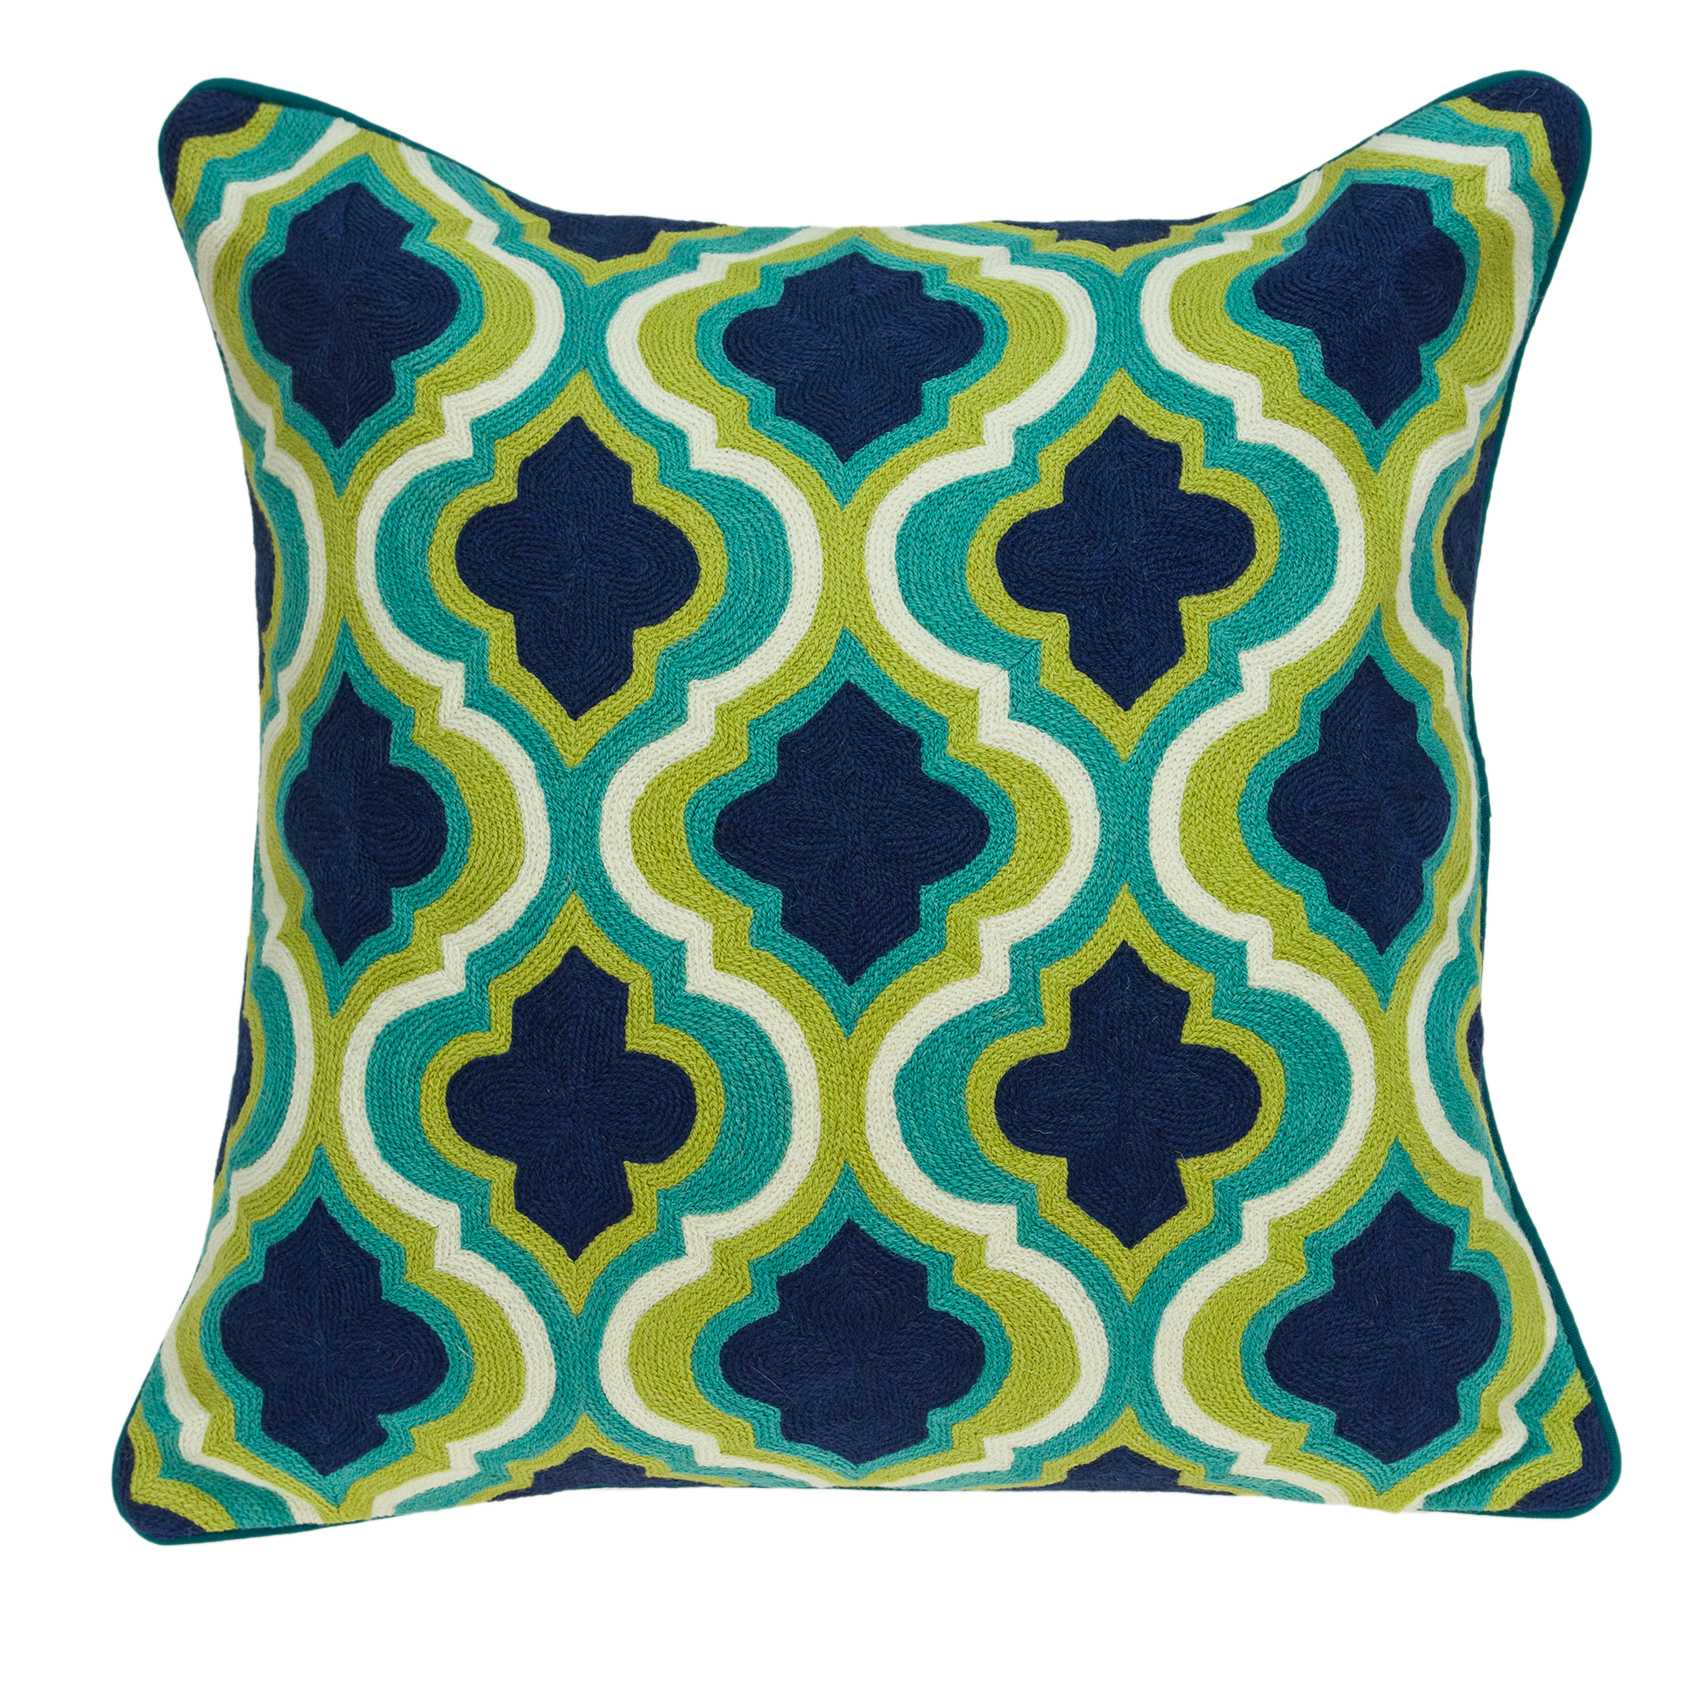 20" x 0.5" x 20" Traditional Dark Blue And Lemon Accent Pillow Cover